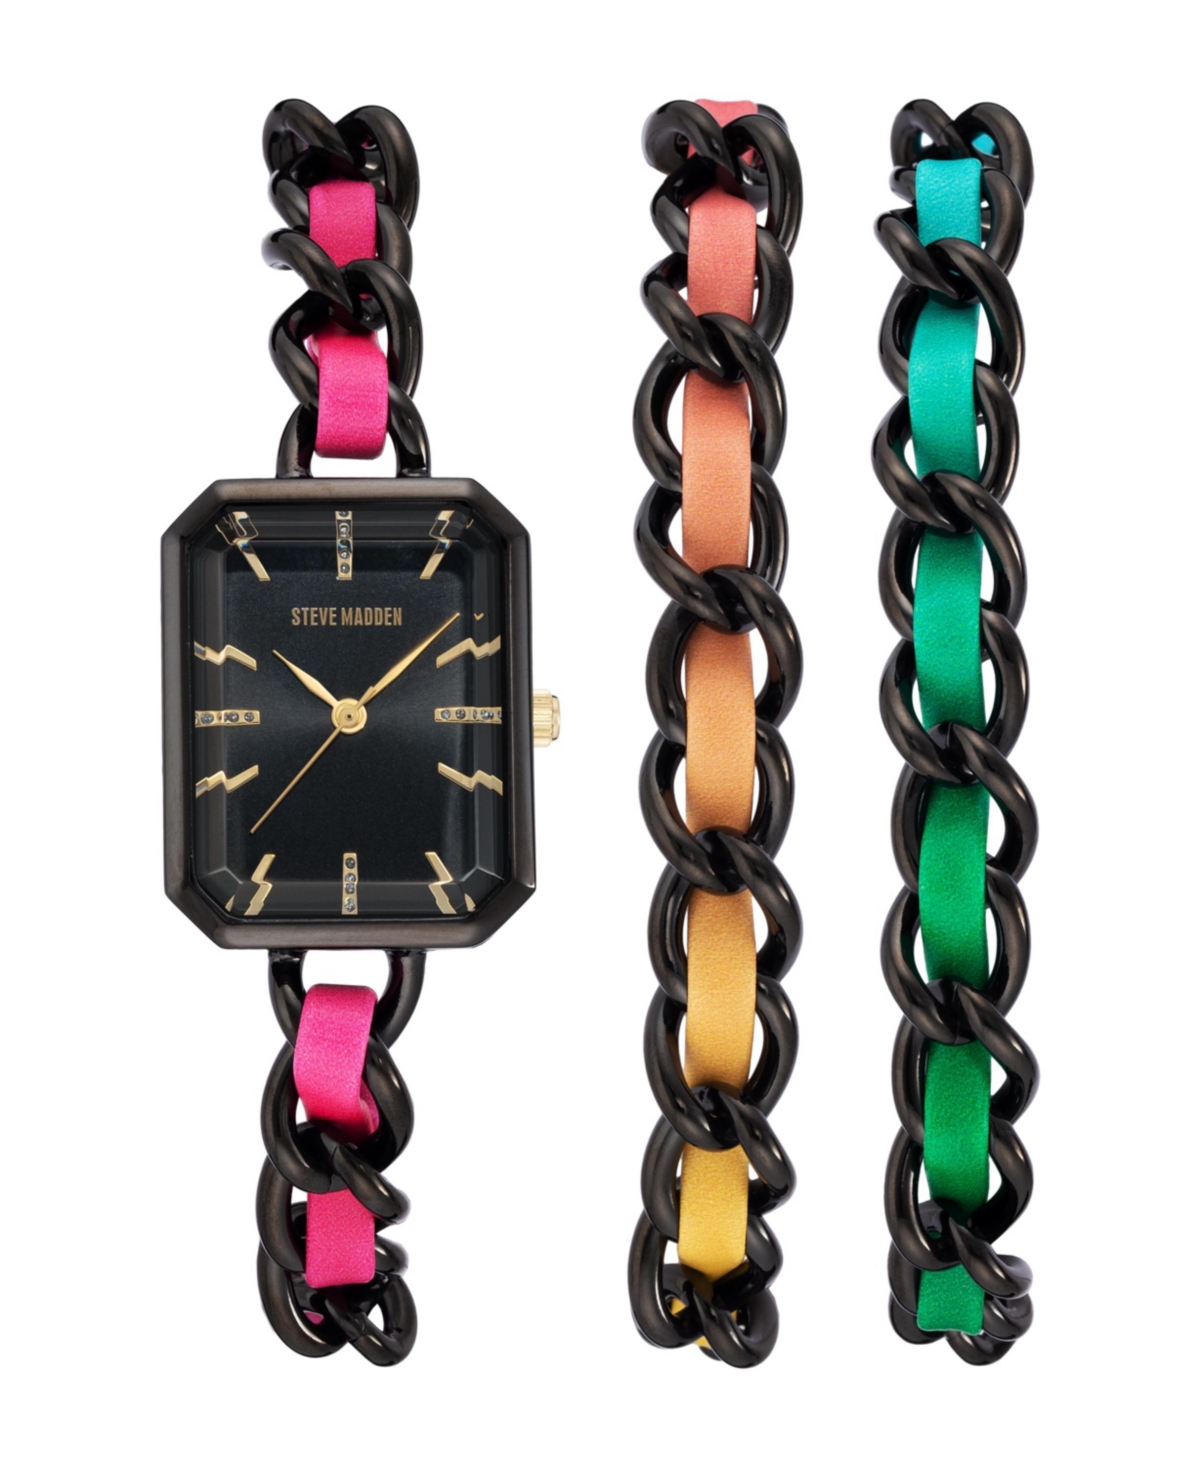 Steve Madden Women's Rainbow Polyurethane Leather Strap With Attached Black-tone Chain Watch Set, 22x28mm In Black,multi